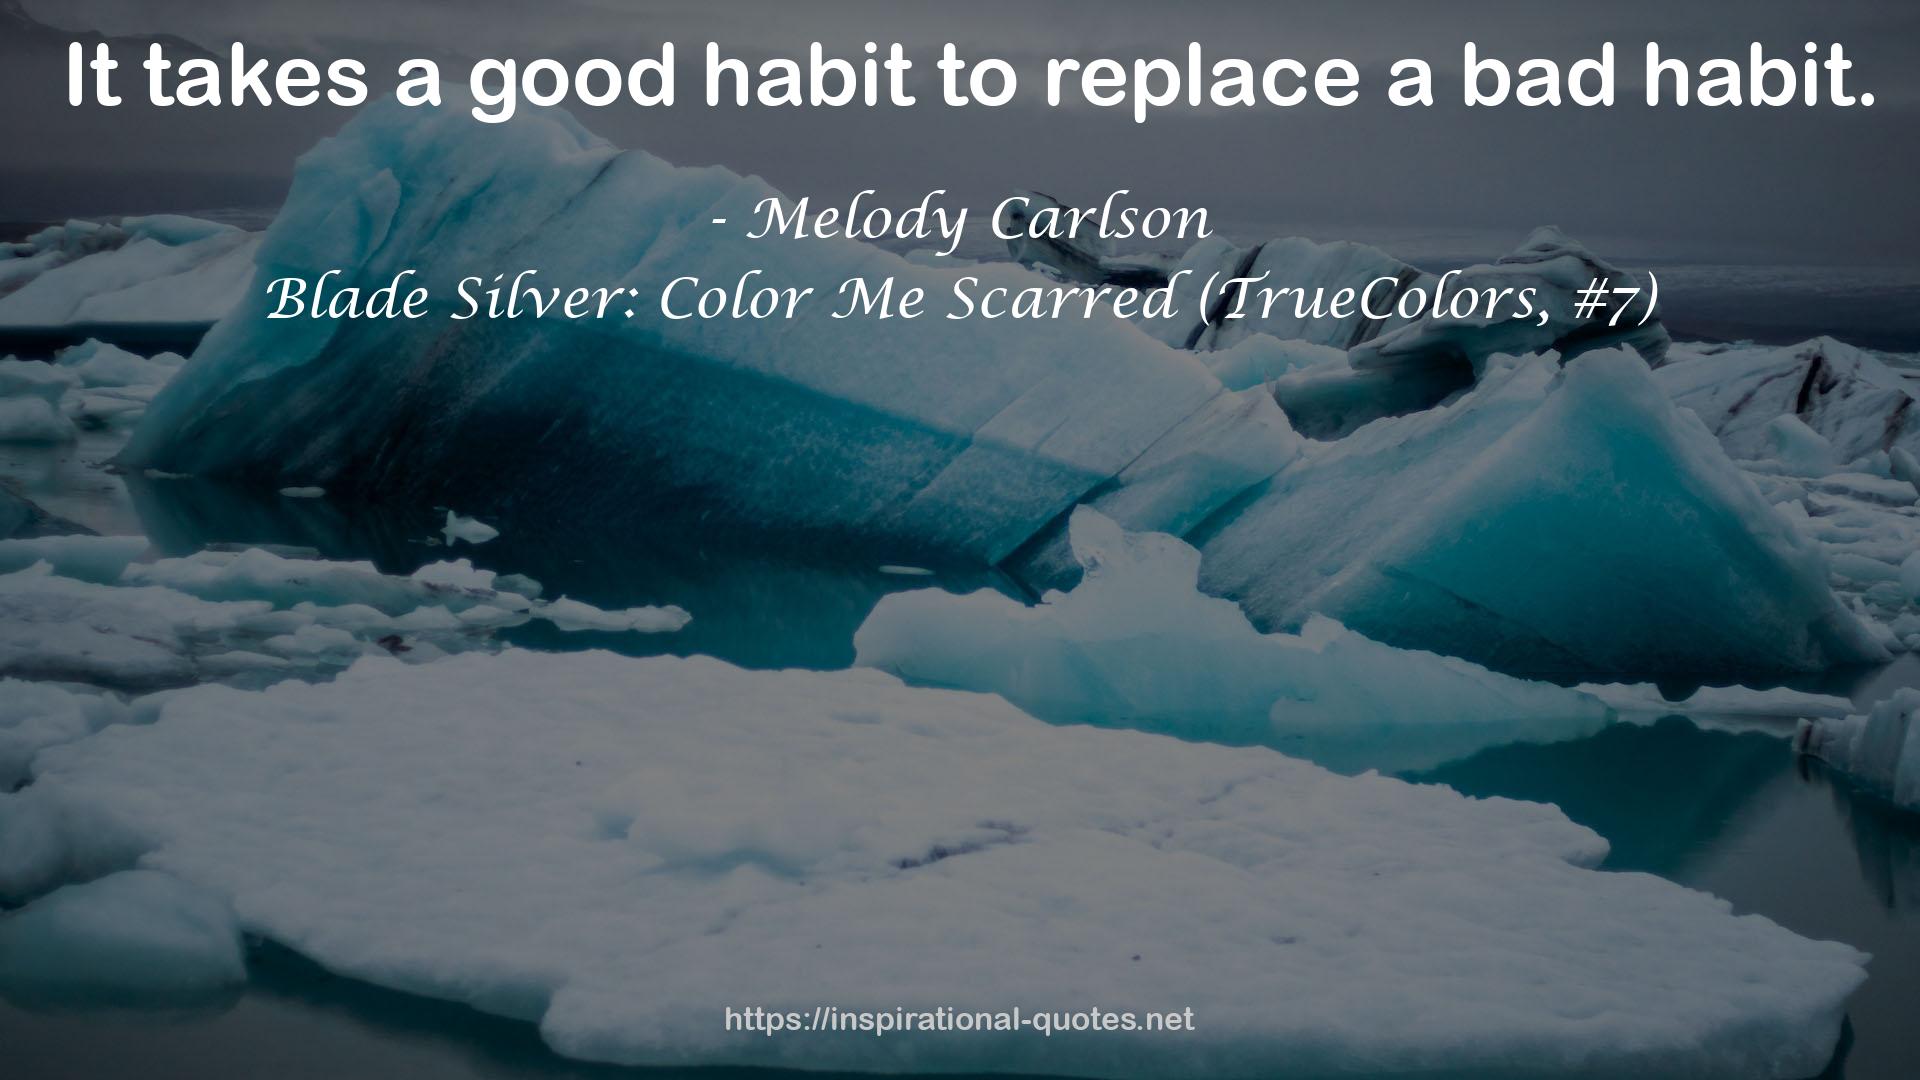 Blade Silver: Color Me Scarred (TrueColors, #7) QUOTES